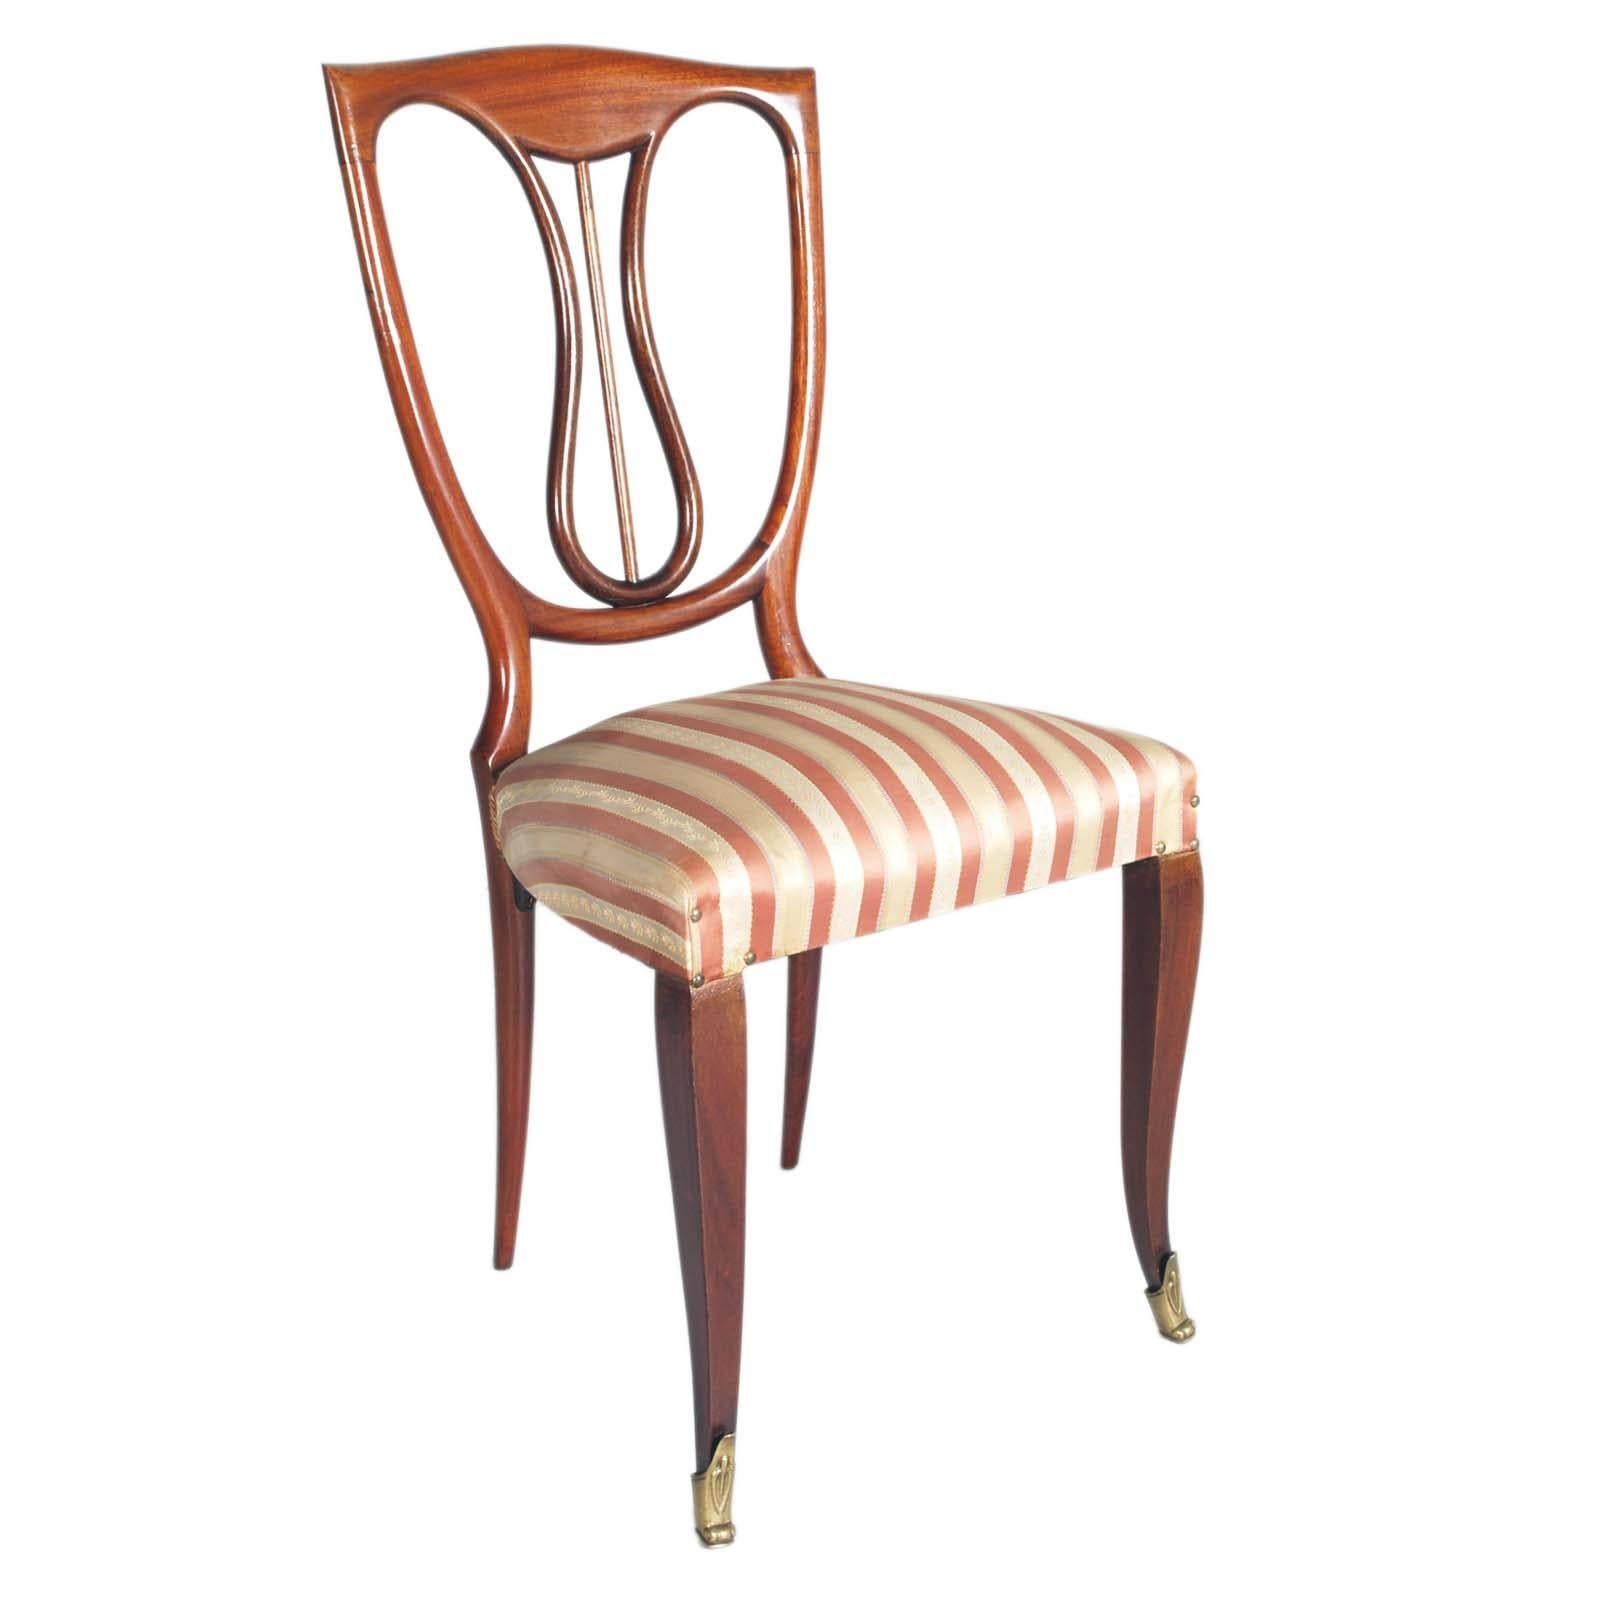 Elegant  1940s  six chairs in mahogany laquered, Melchiorre Bega attributed; neoclassical stylized LIRA backrest. Feet in embossed gilded brass. 
Chairs to be reupholstered with fabric in shades on request, included in the price
Chairs of great